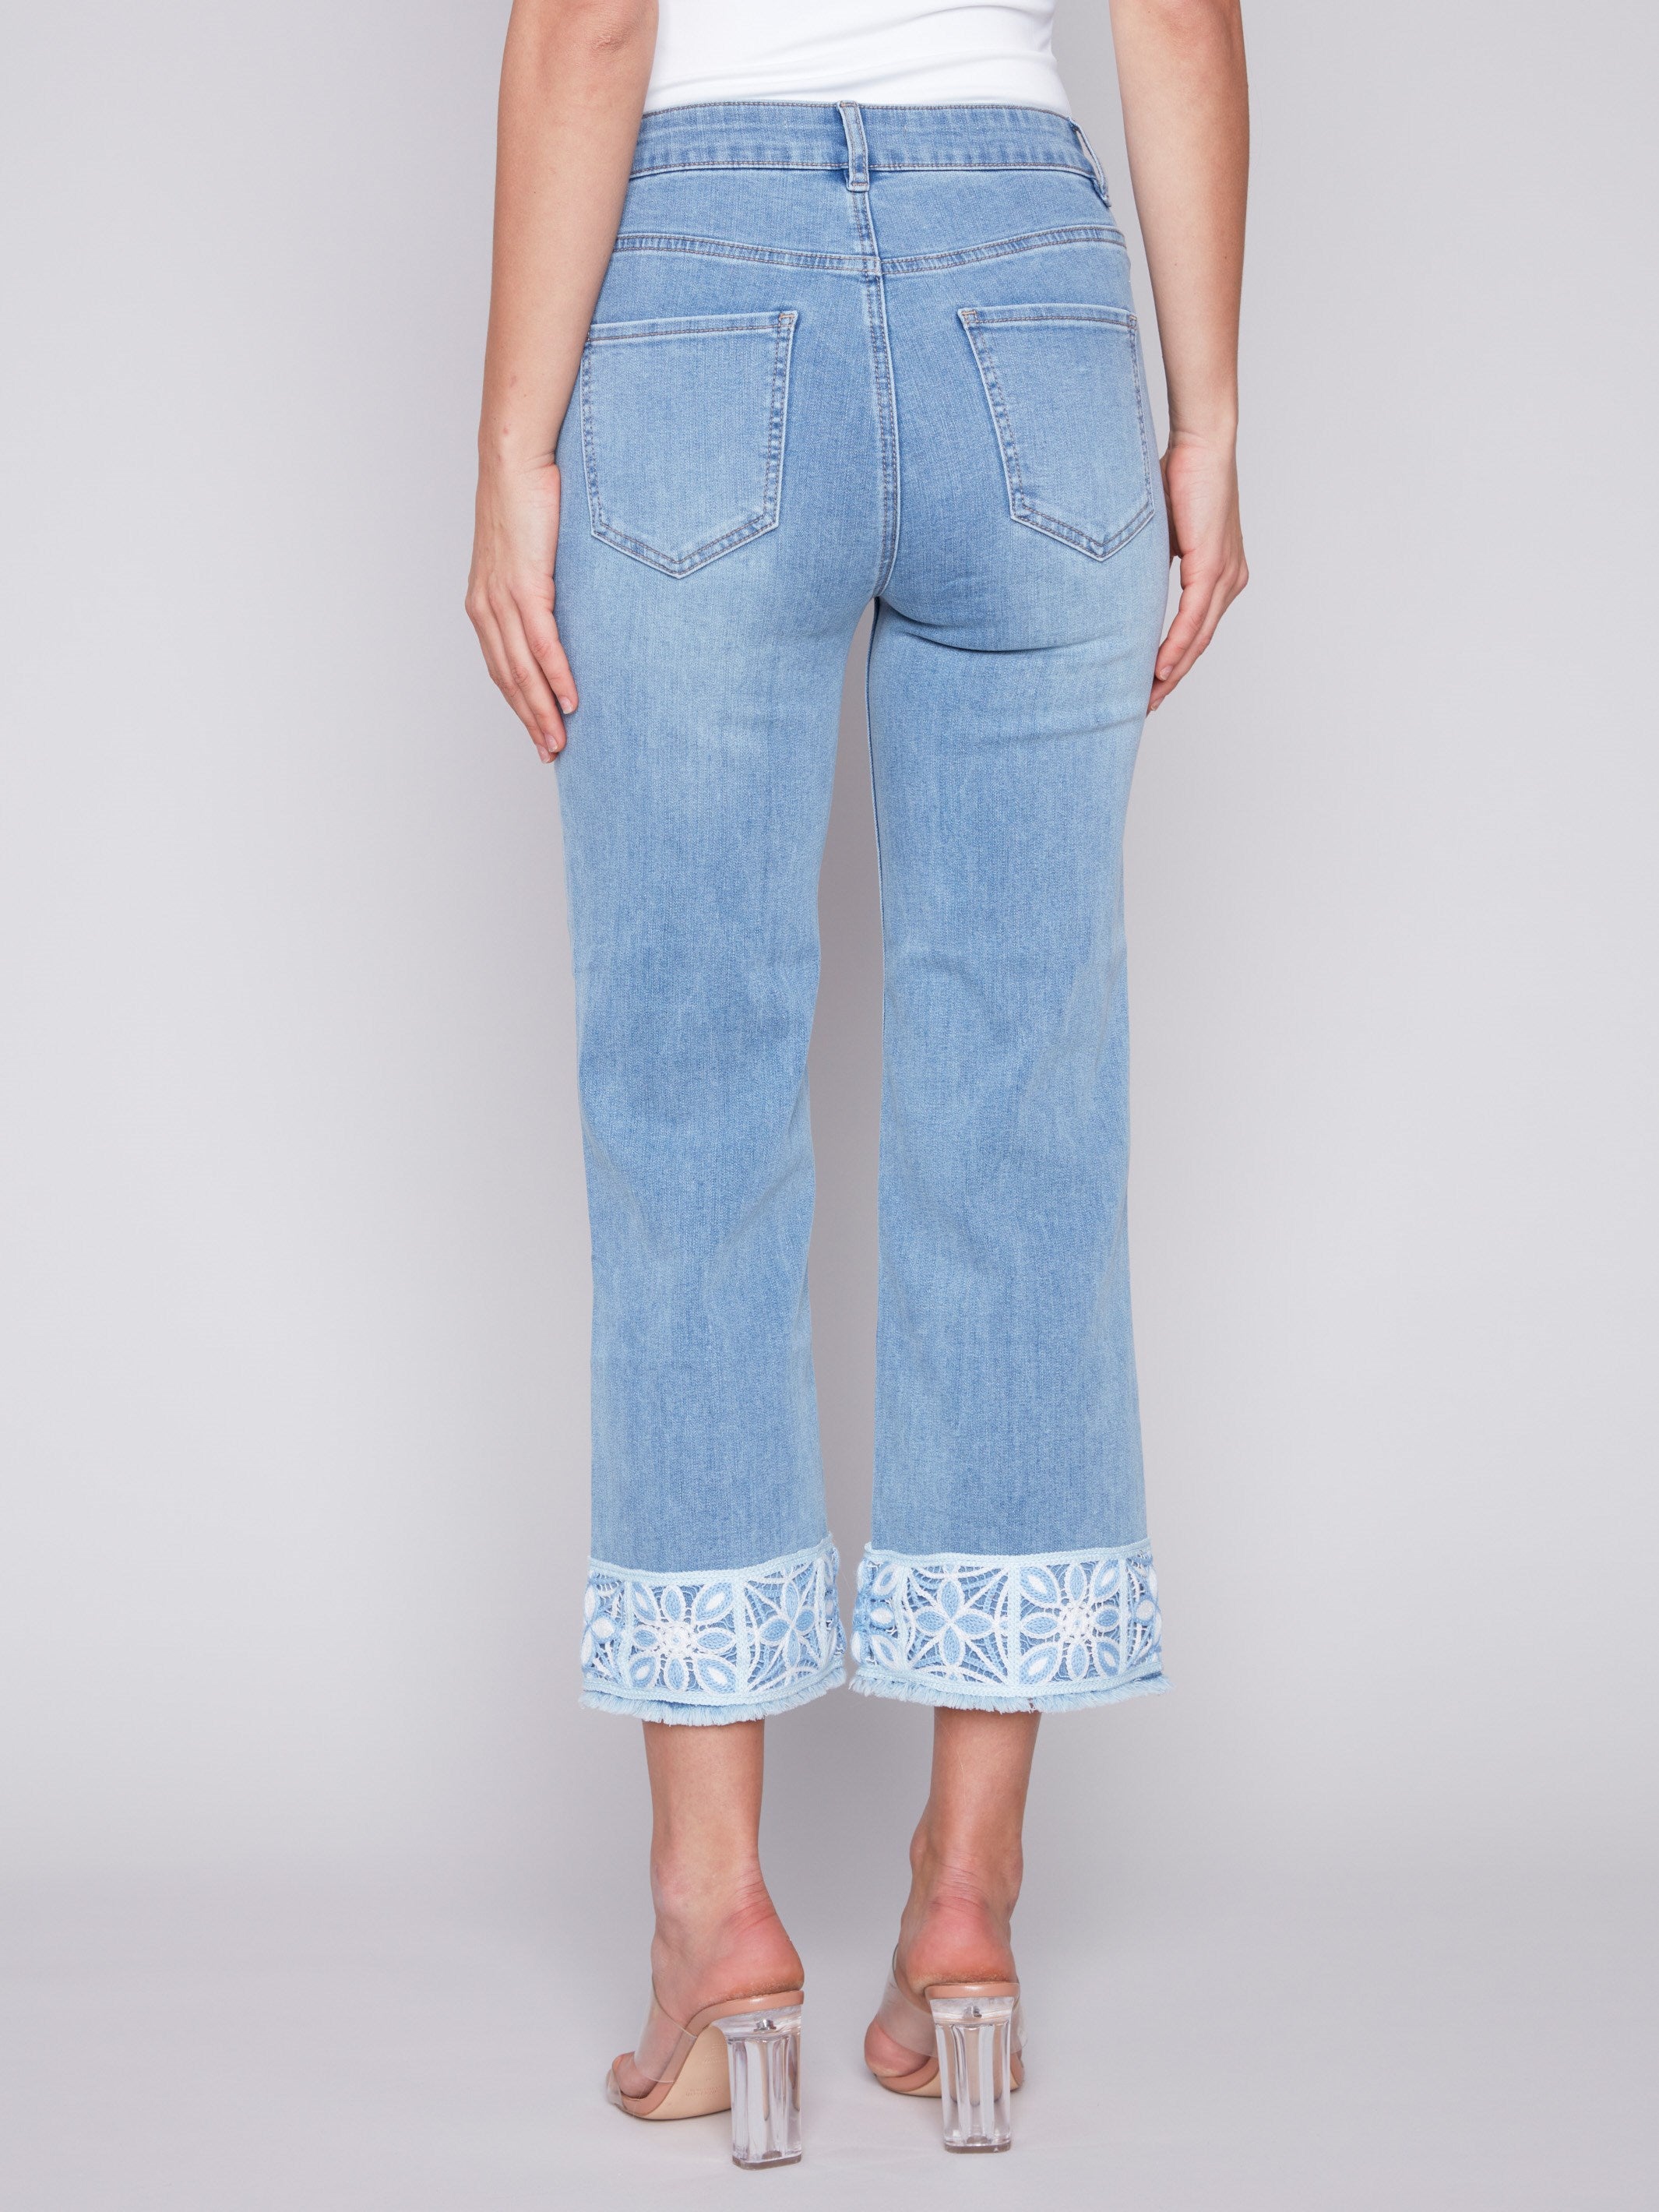 Charlie B Jeans with Crochet Cuff - Light Blue - Image 3